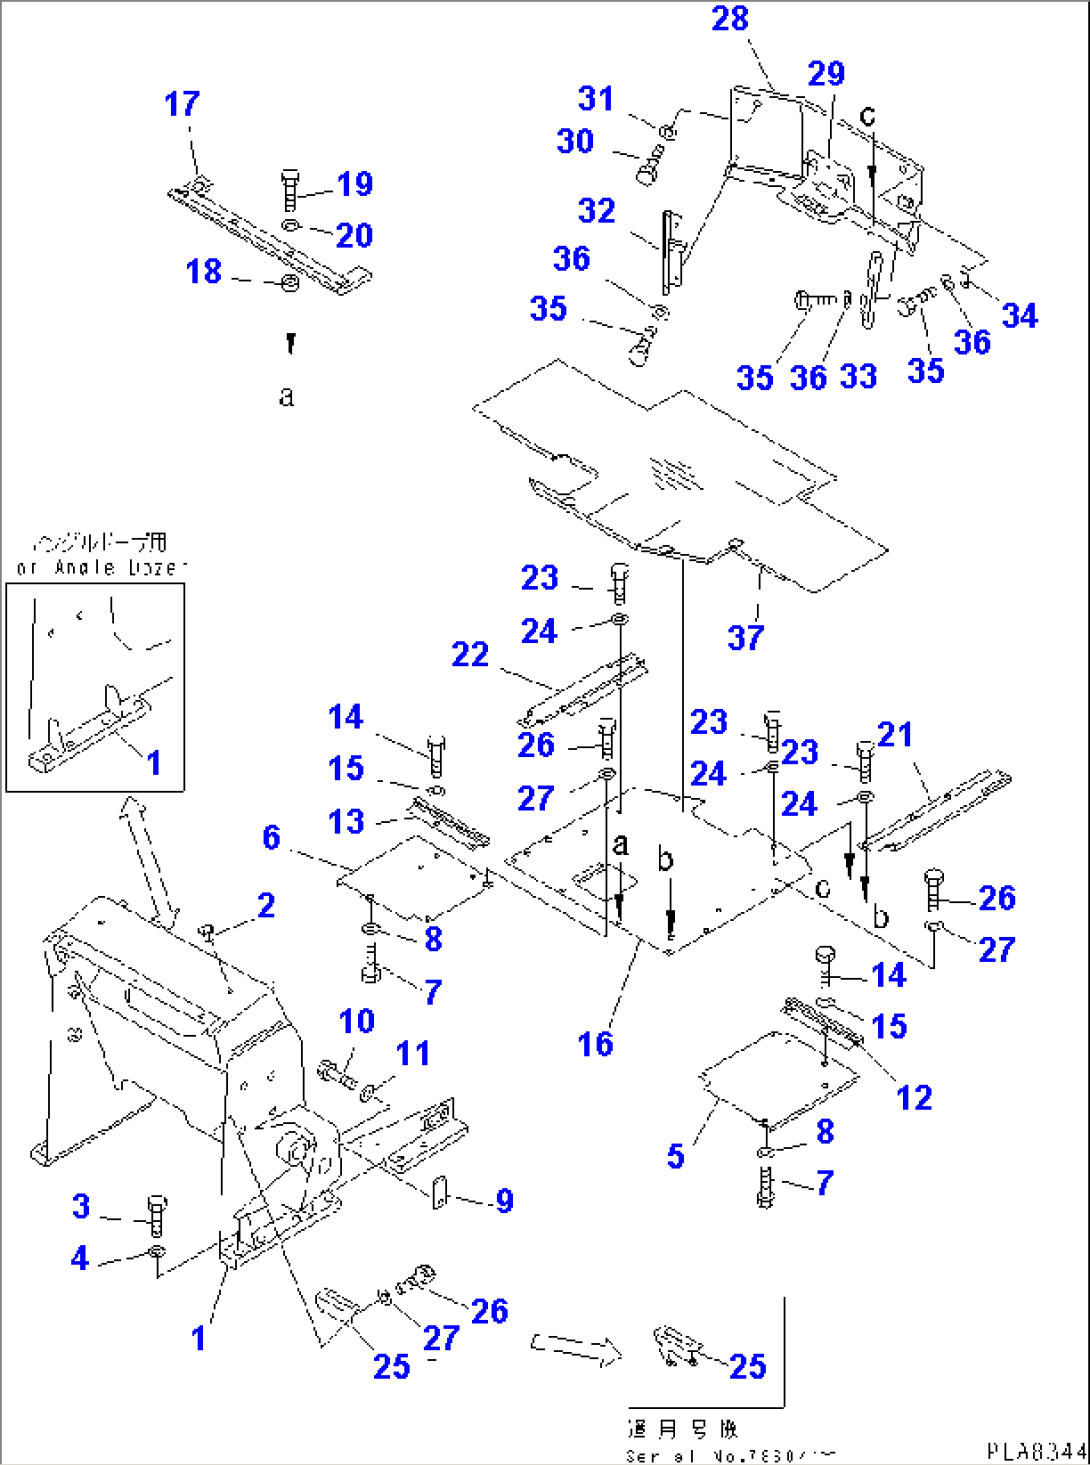 LOADER FRAME AND FLOOR PLATE (WITH STEEL CAB)